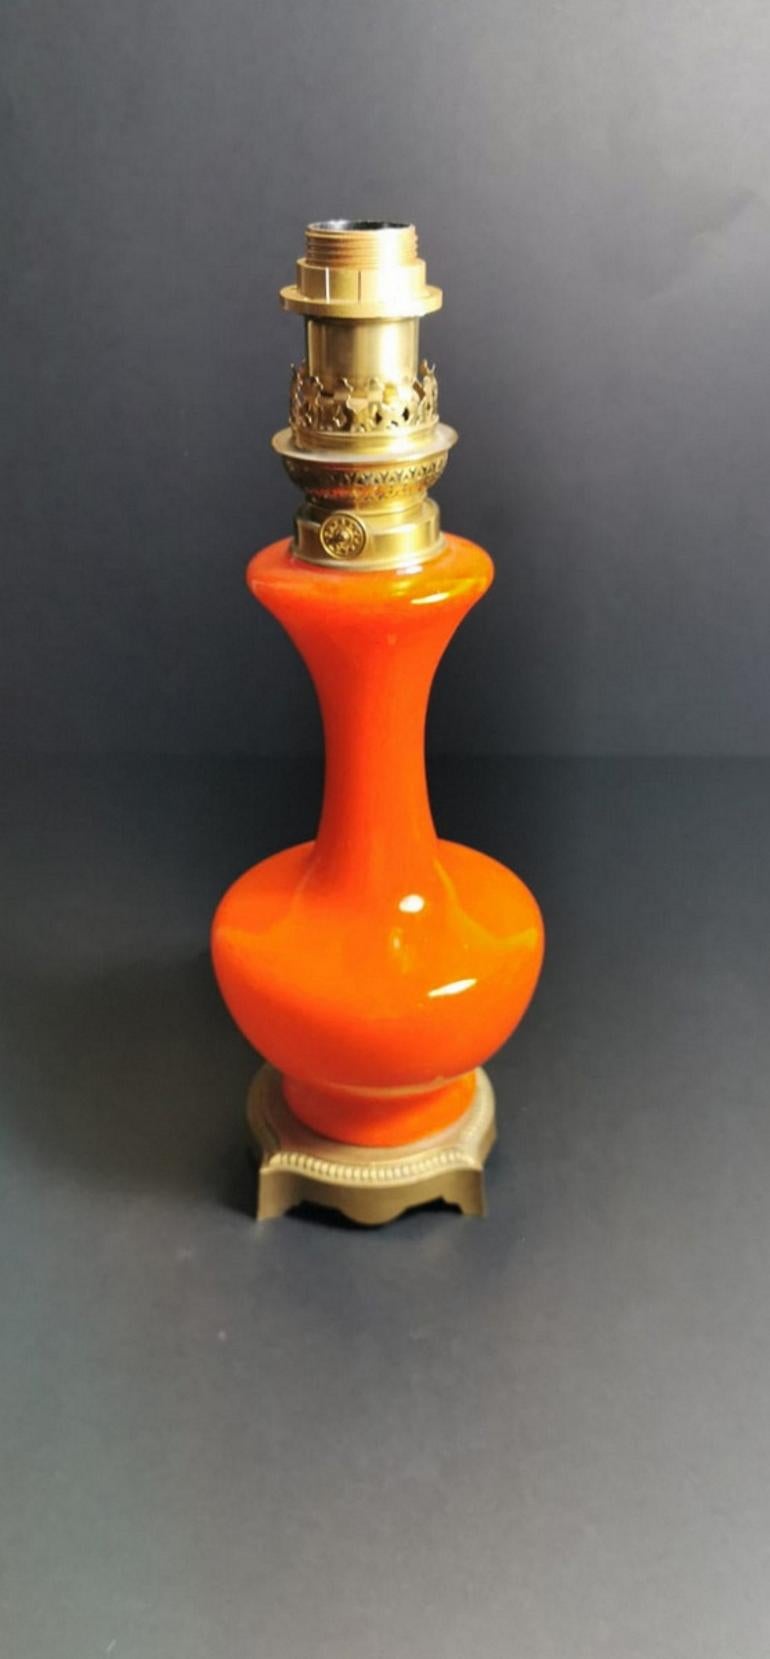 We kindly suggest you read the whole description, because with it we try to give you detailed technical and historical information to guarantee the authenticity of our objects.
Originally this lamp was an oil lamp, over time the mechanism with the